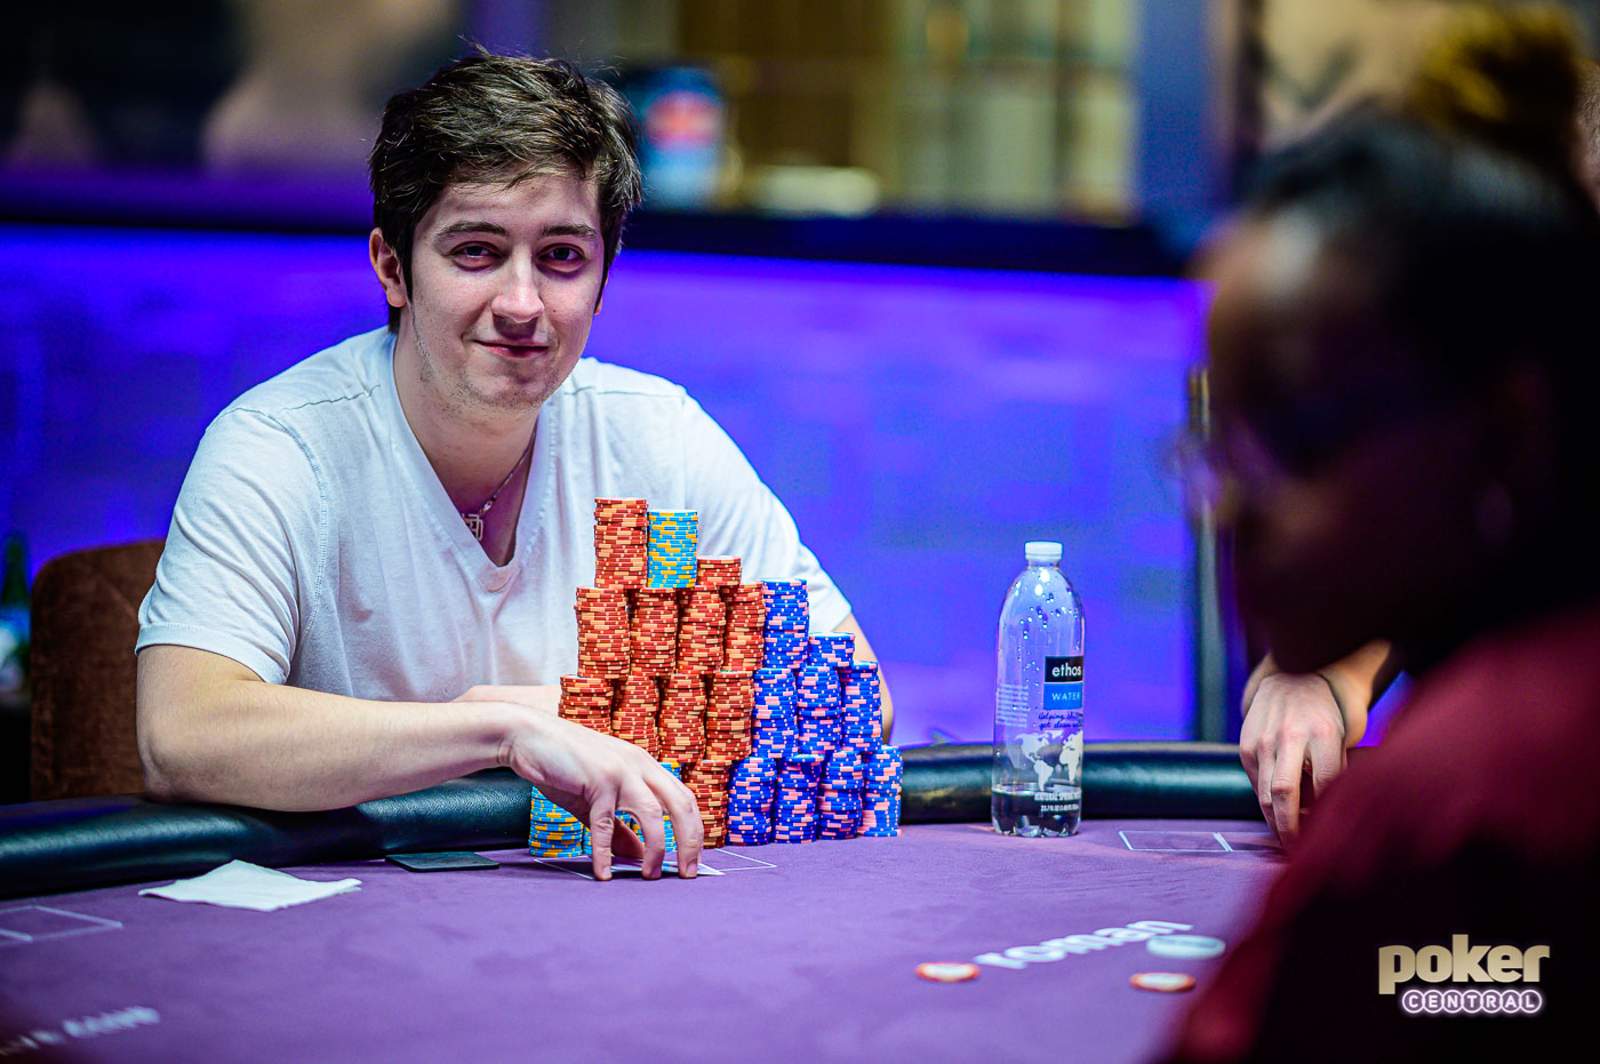 Ali Imsirovic Leads Super High Roller Bowl Online with $1.775 Million Up For Grabs